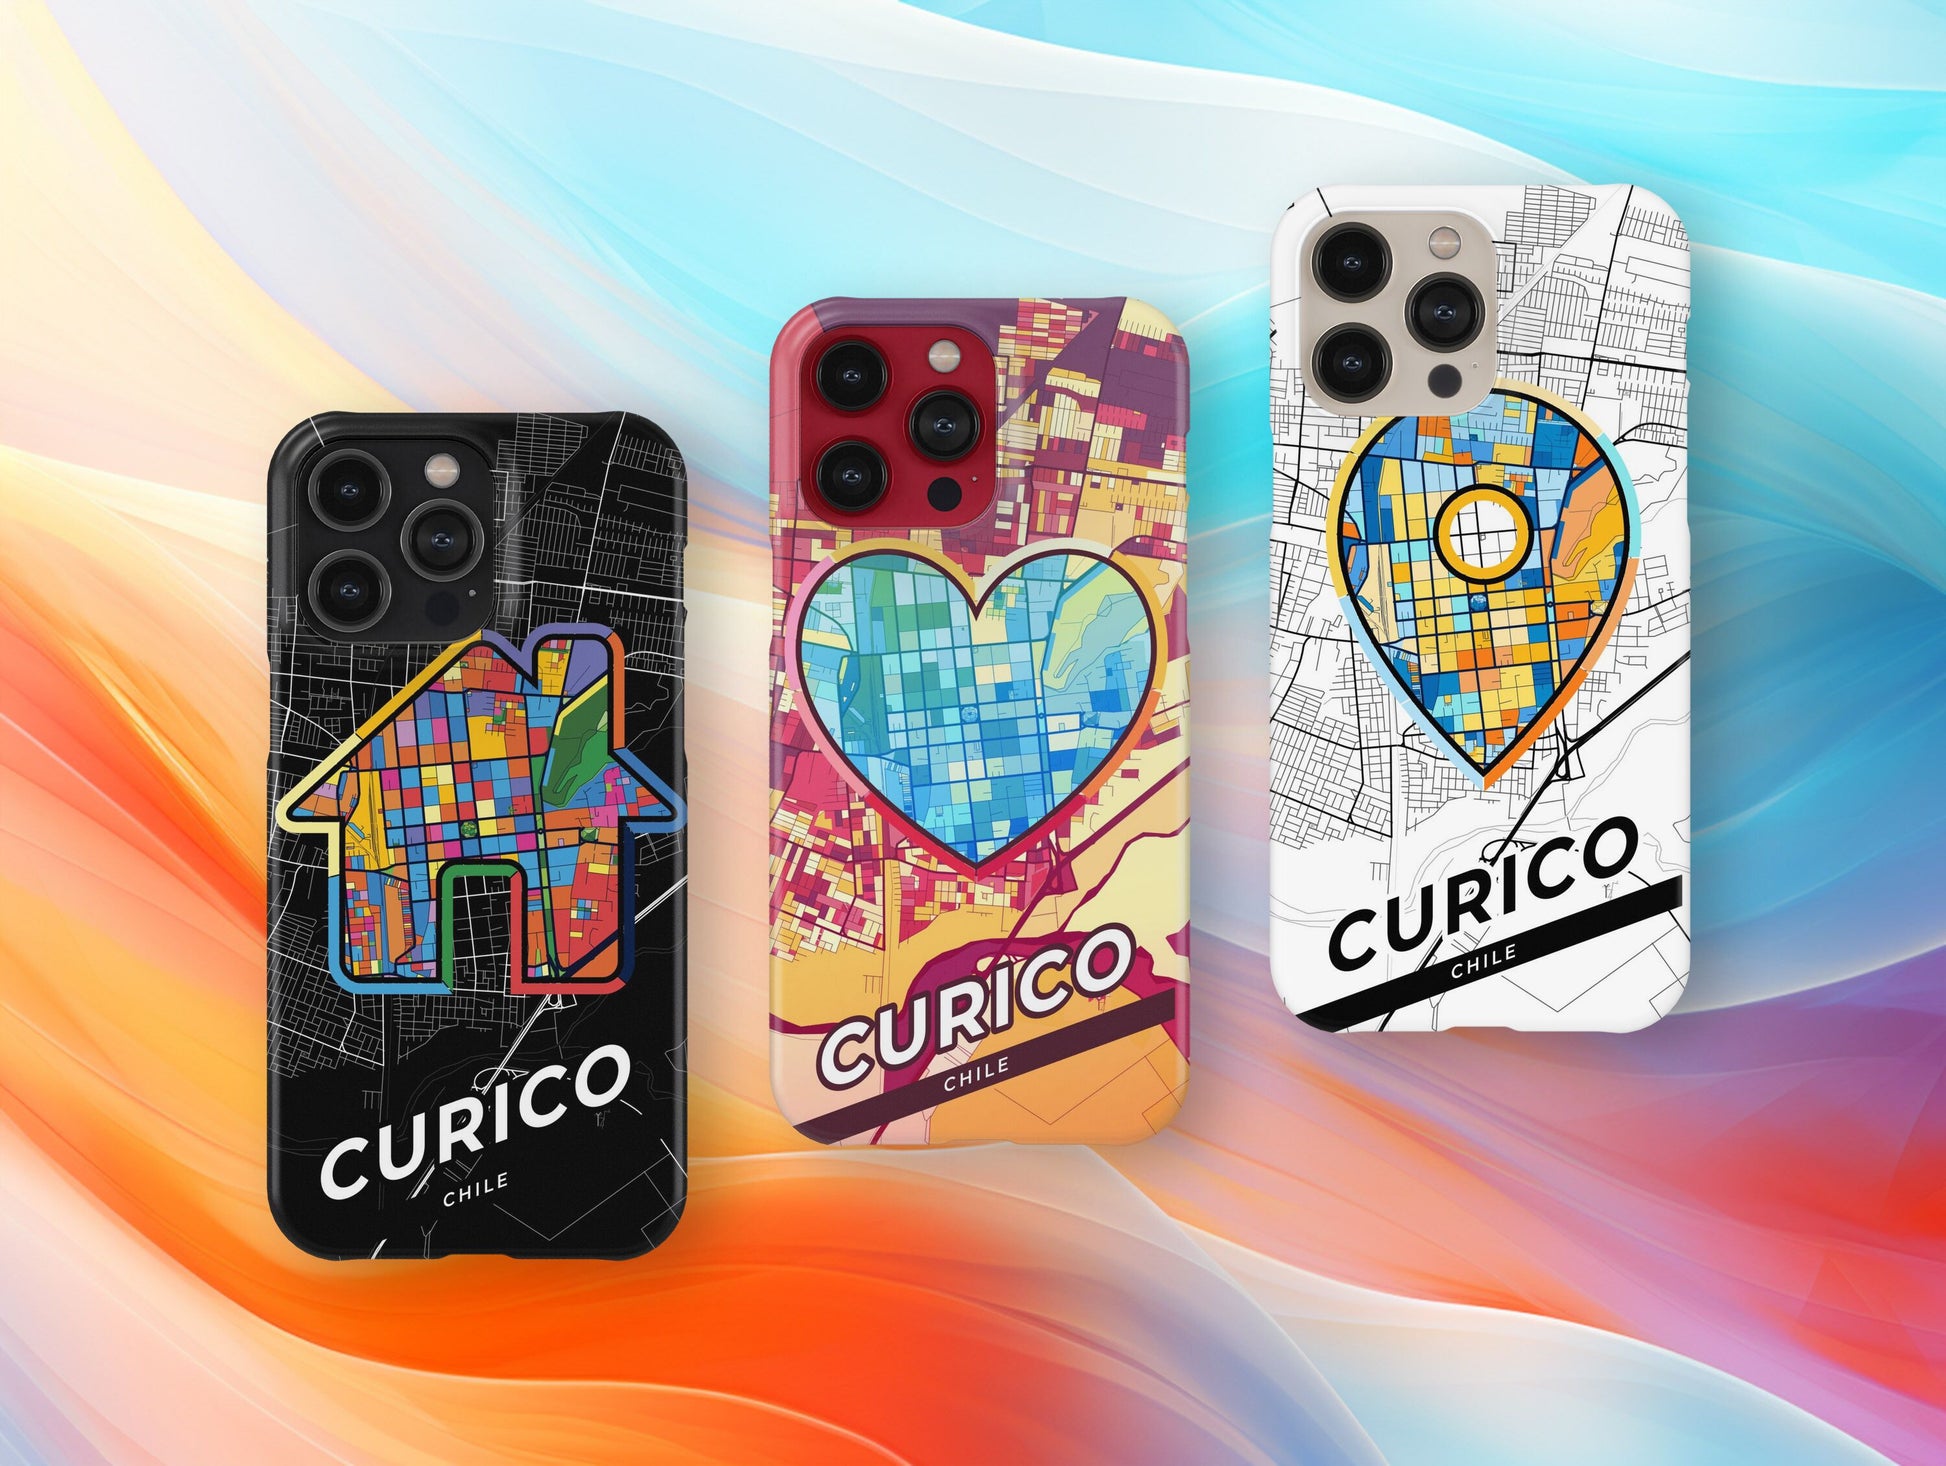 Curico Chile slim phone case with colorful icon. Birthday, wedding or housewarming gift. Couple match cases.